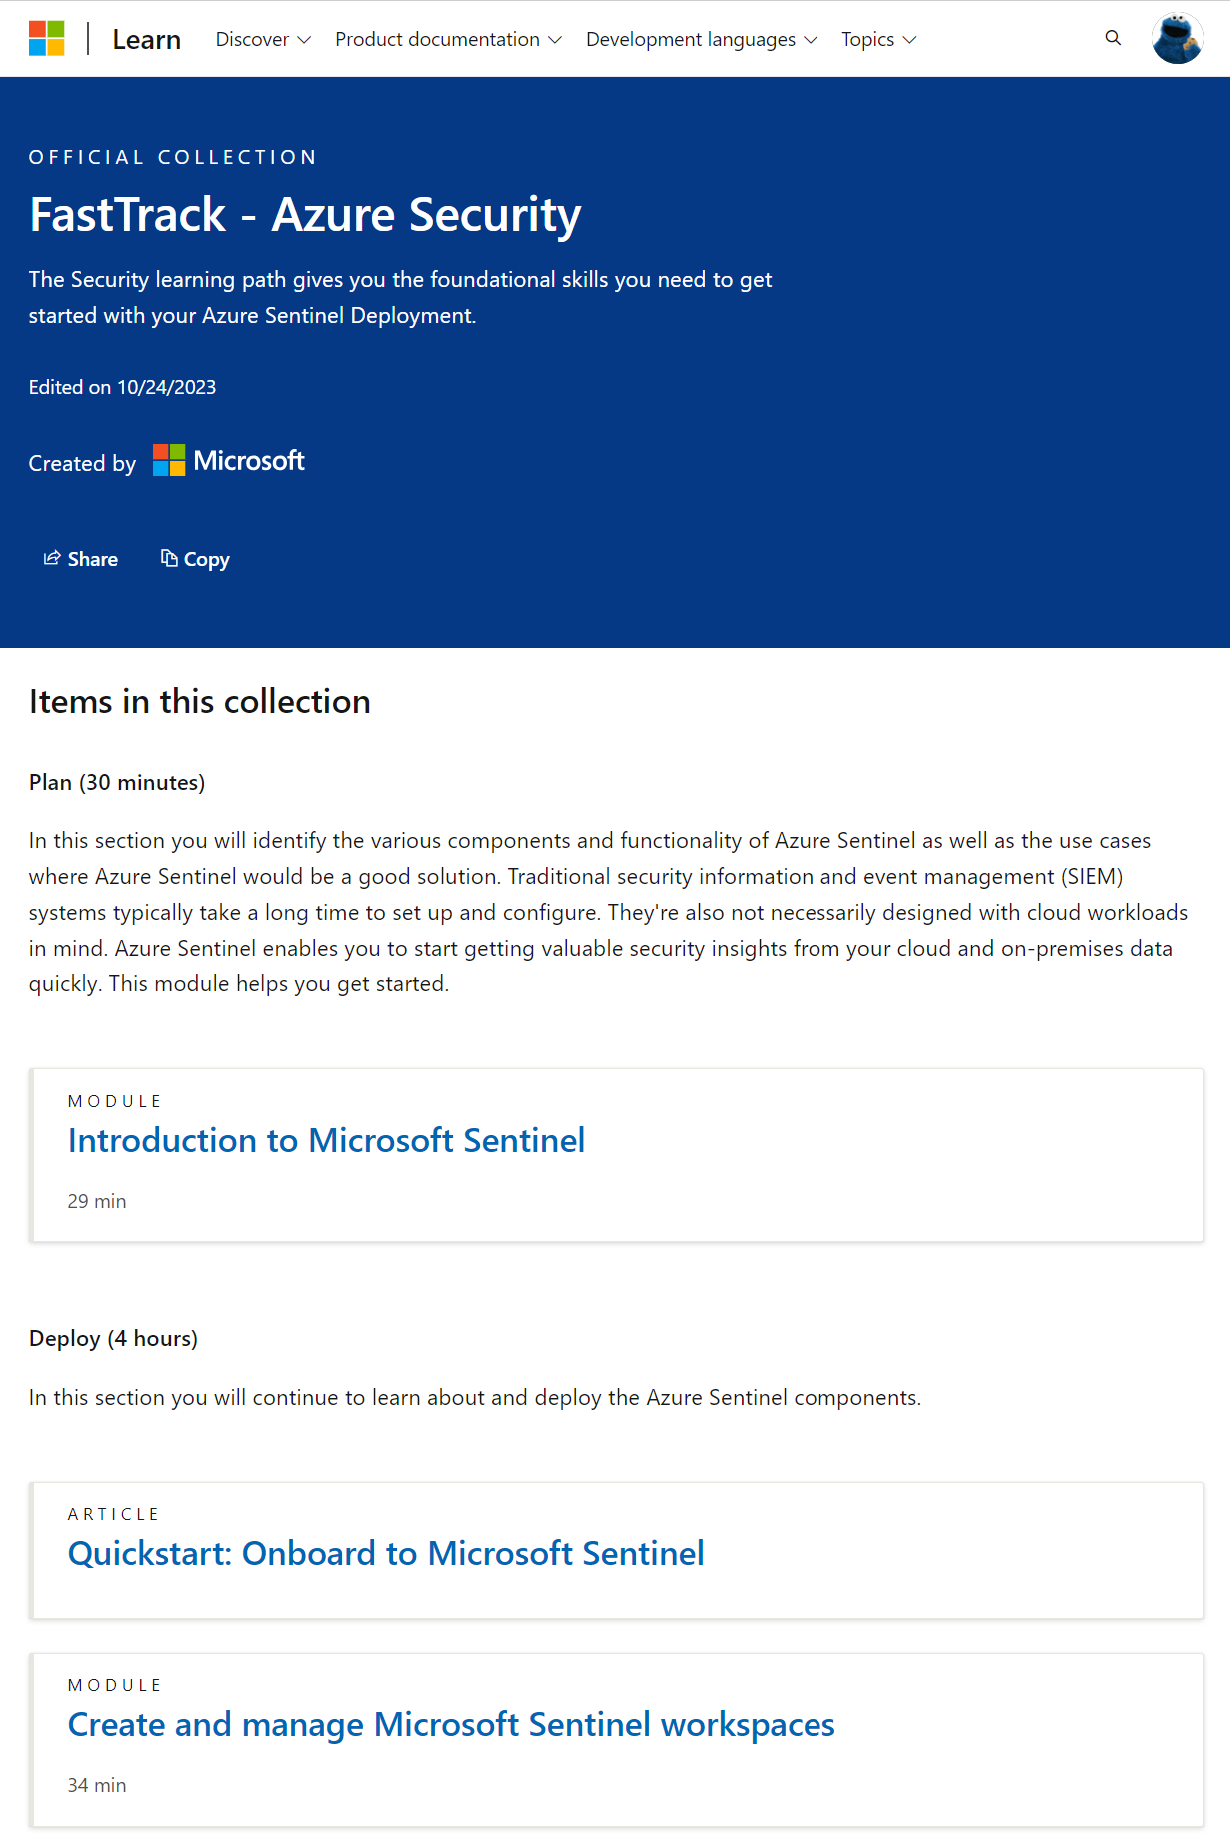 Screenshot of the FastTrack - Azure Security Official Collection by Microsoft